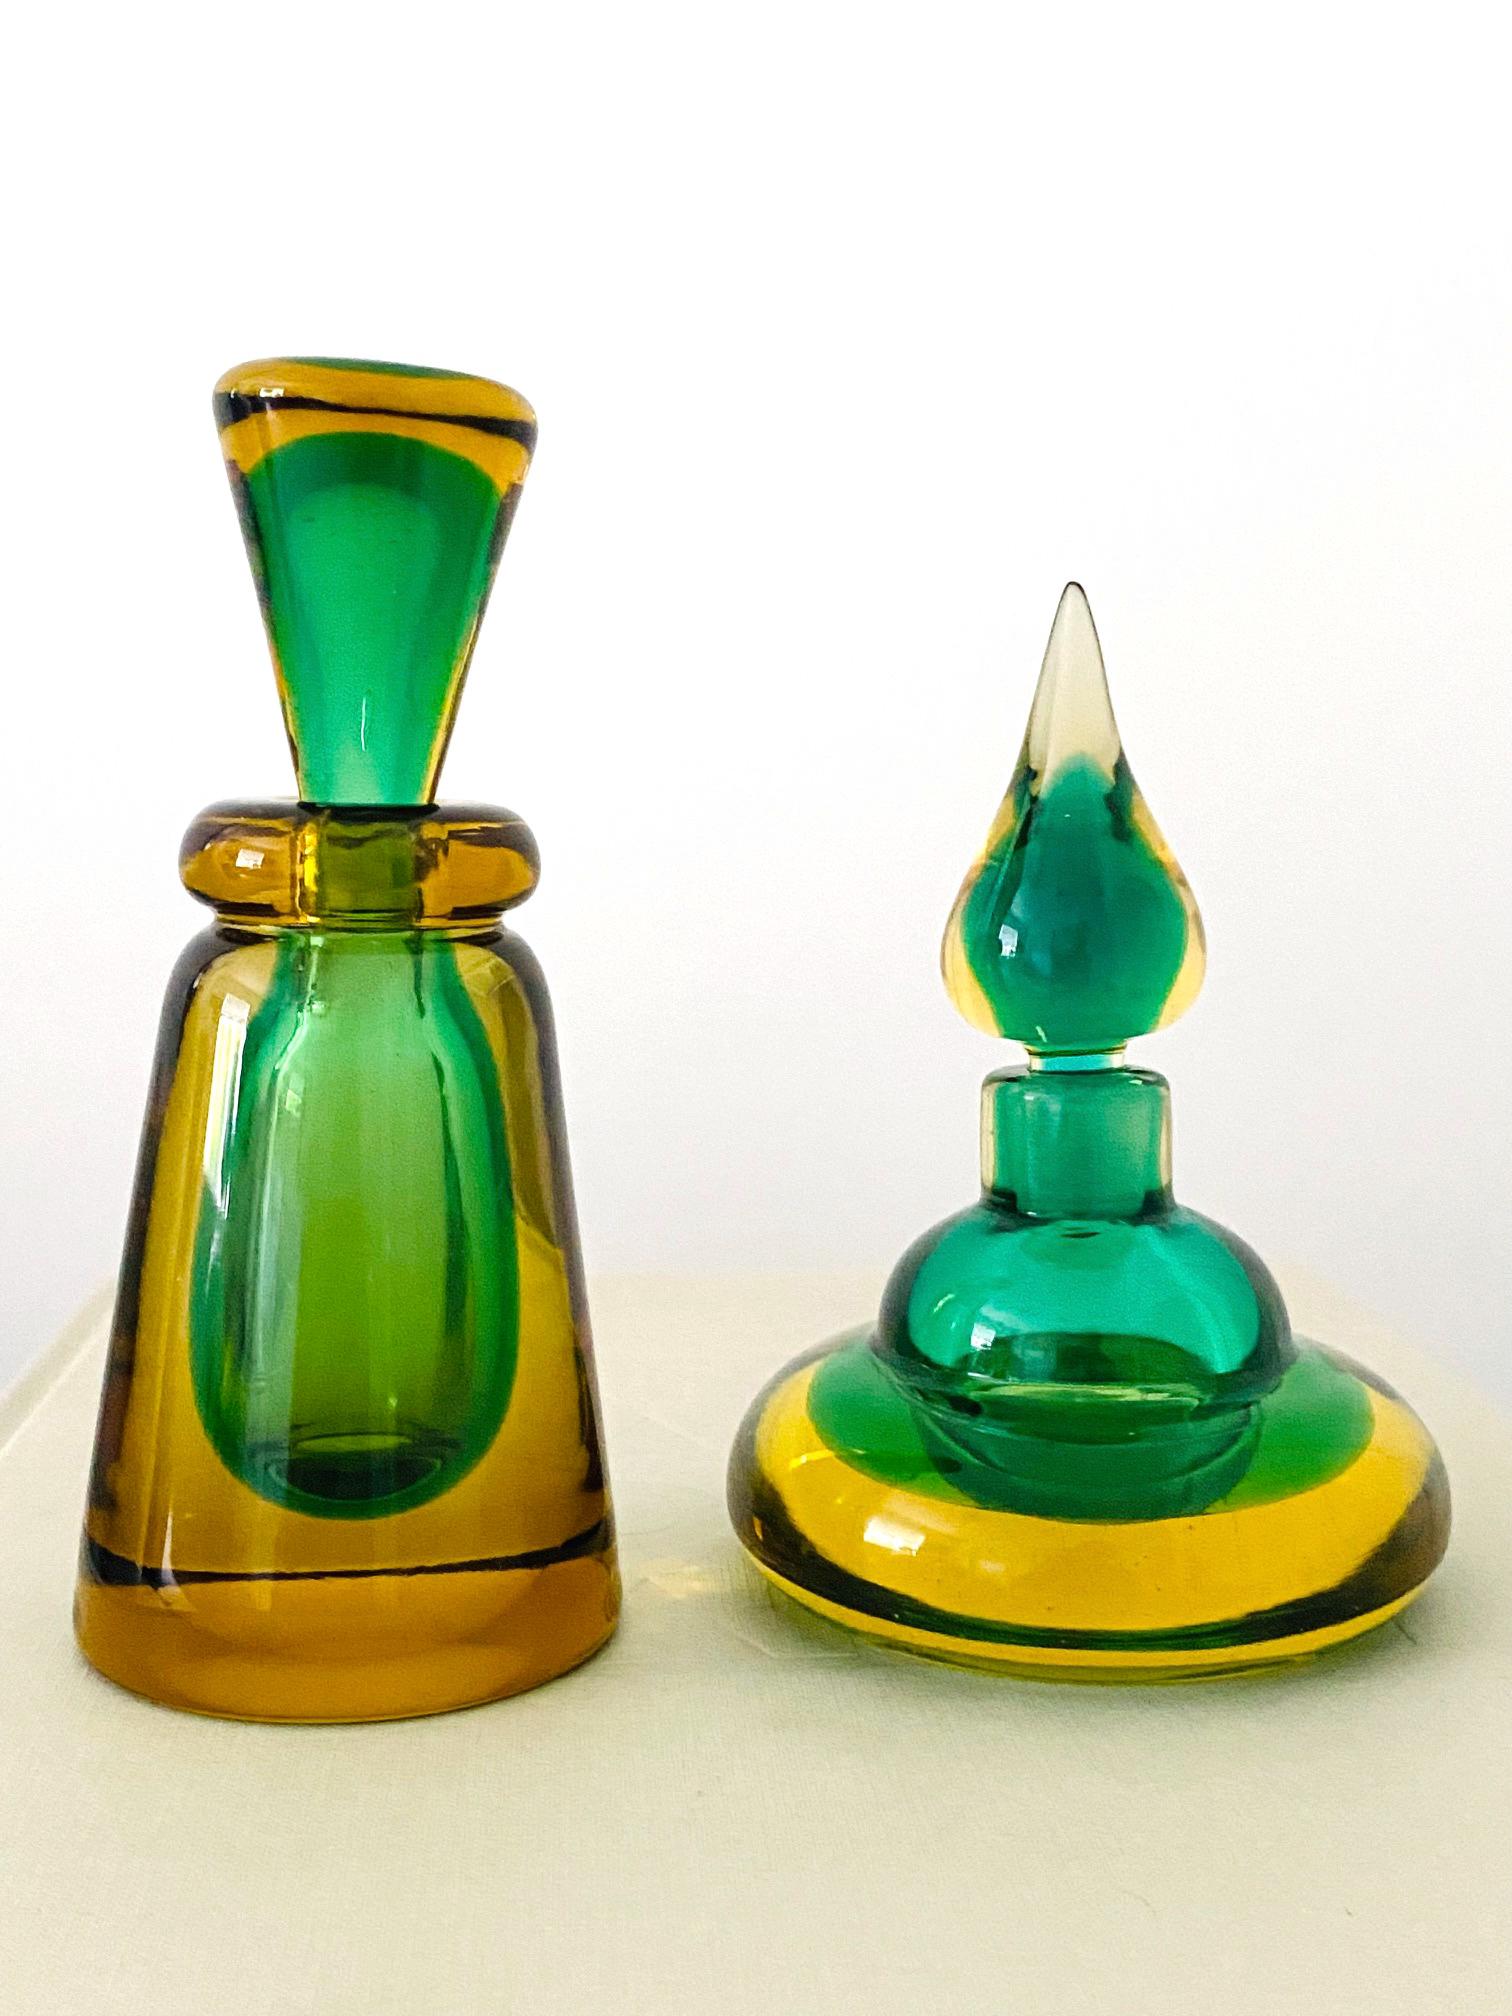 Italian Pair of Murano Glass Bottles in Green and Yellow by Flavio Poli, Italy, c. 1960